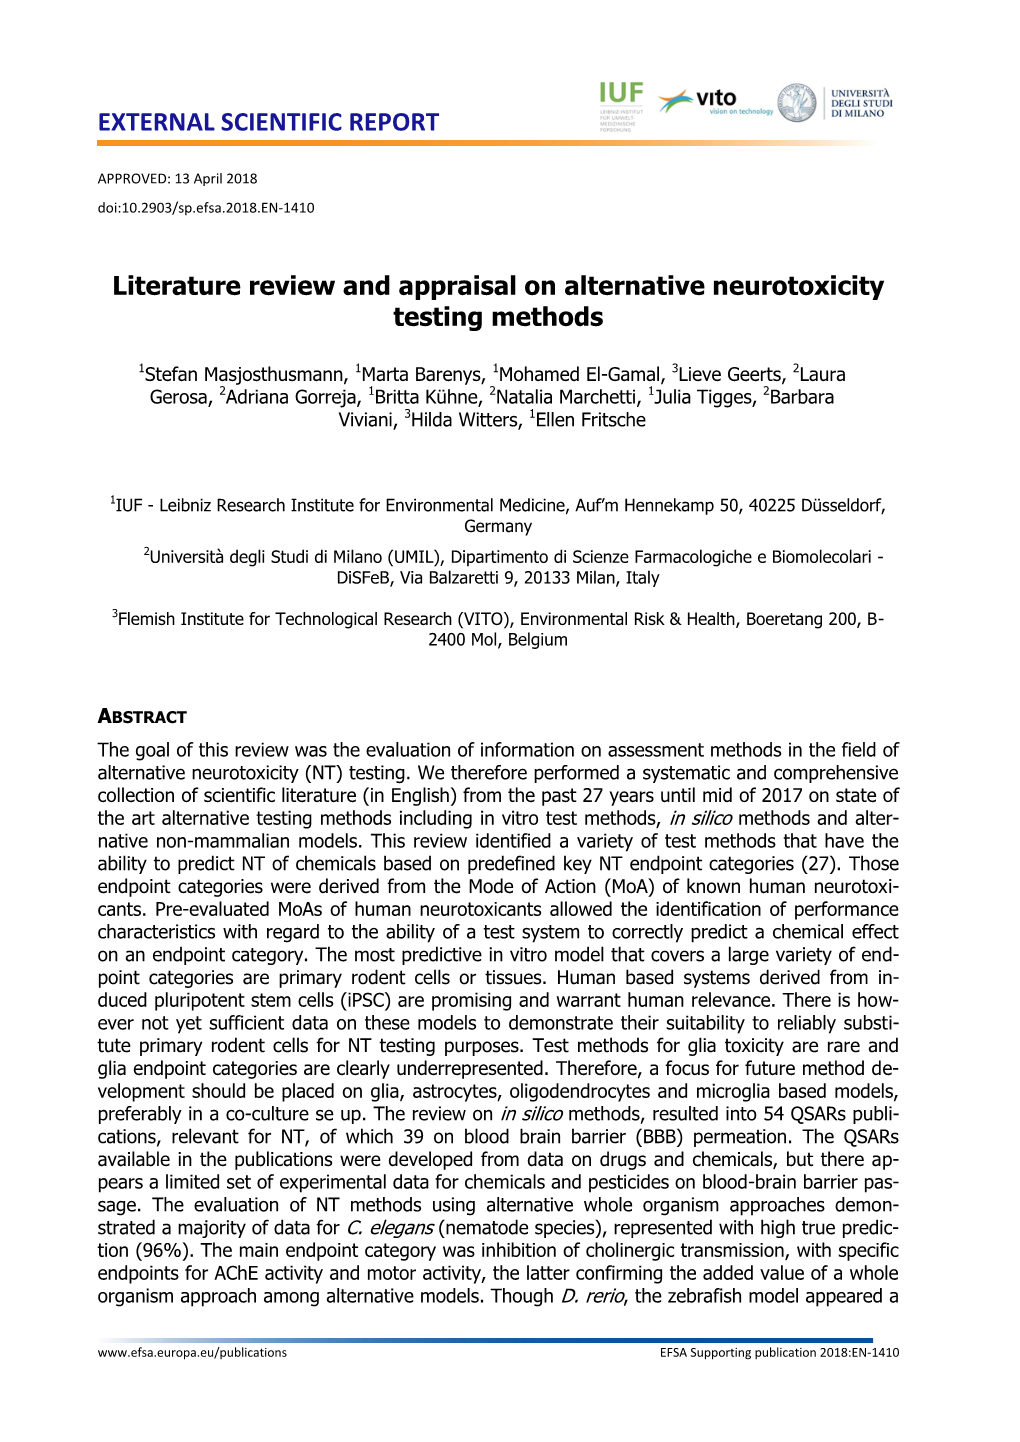 Literature Review and Appraisal on Alternative Neurotoxicity Testing Methods